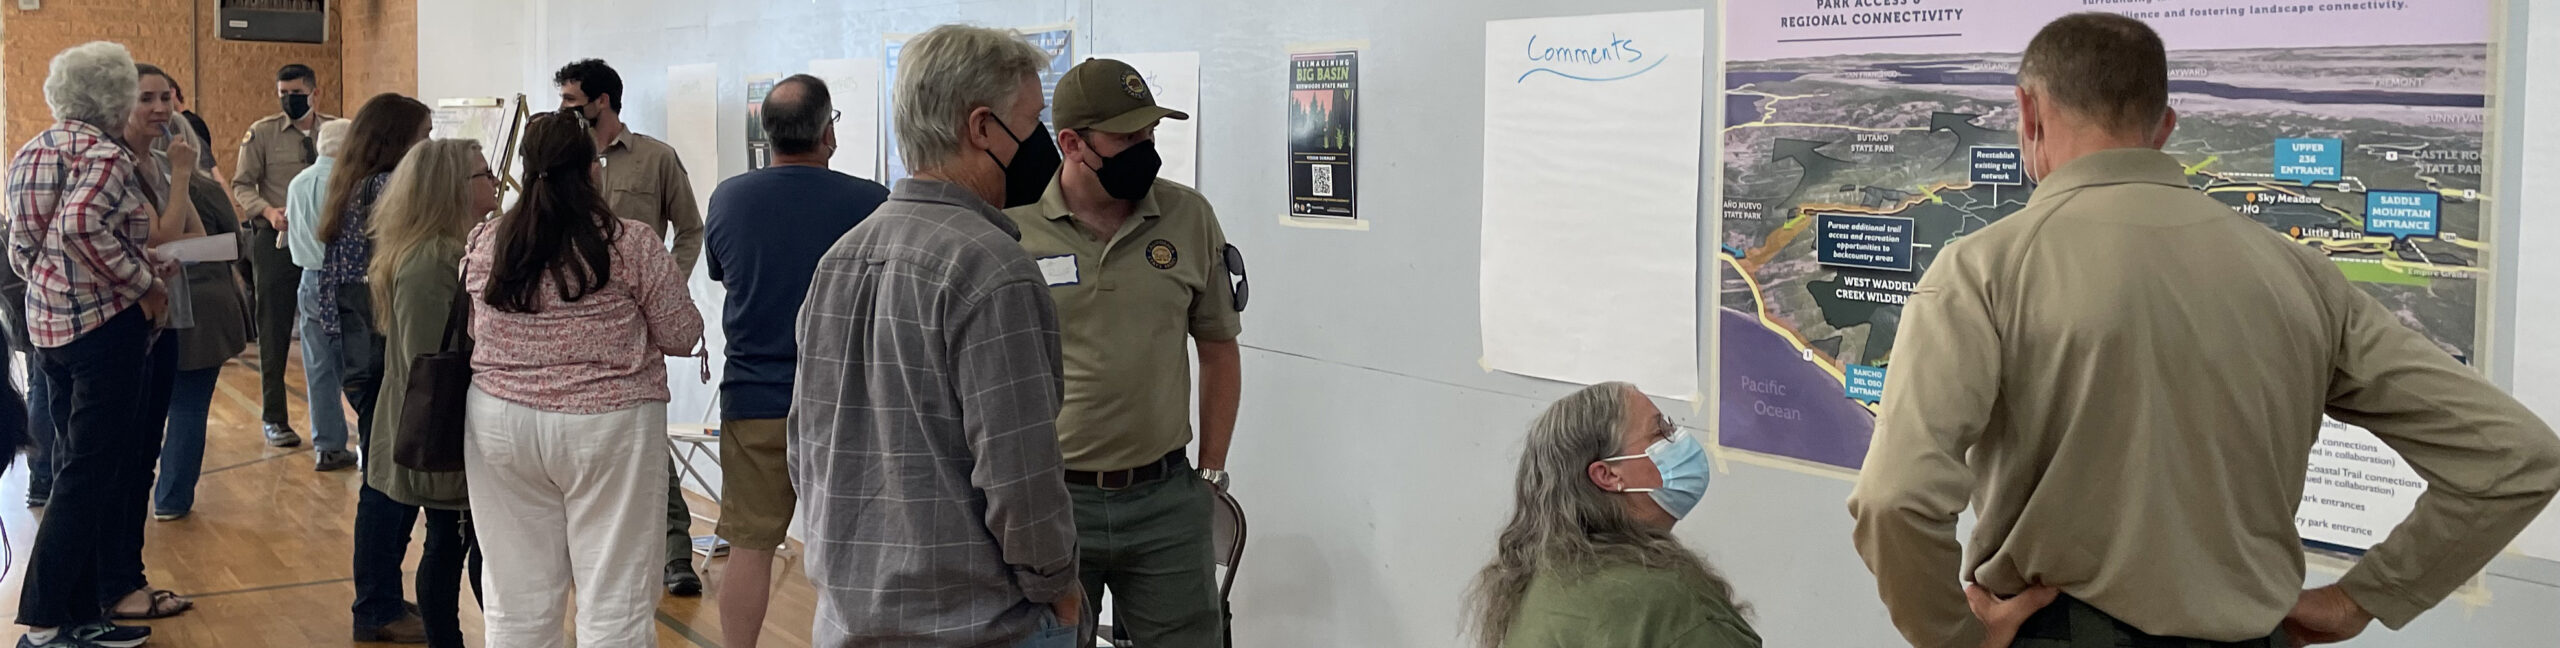 Several members of the public and park staff look at large maps pinned to the wall at a meeting to discuss future park plans.